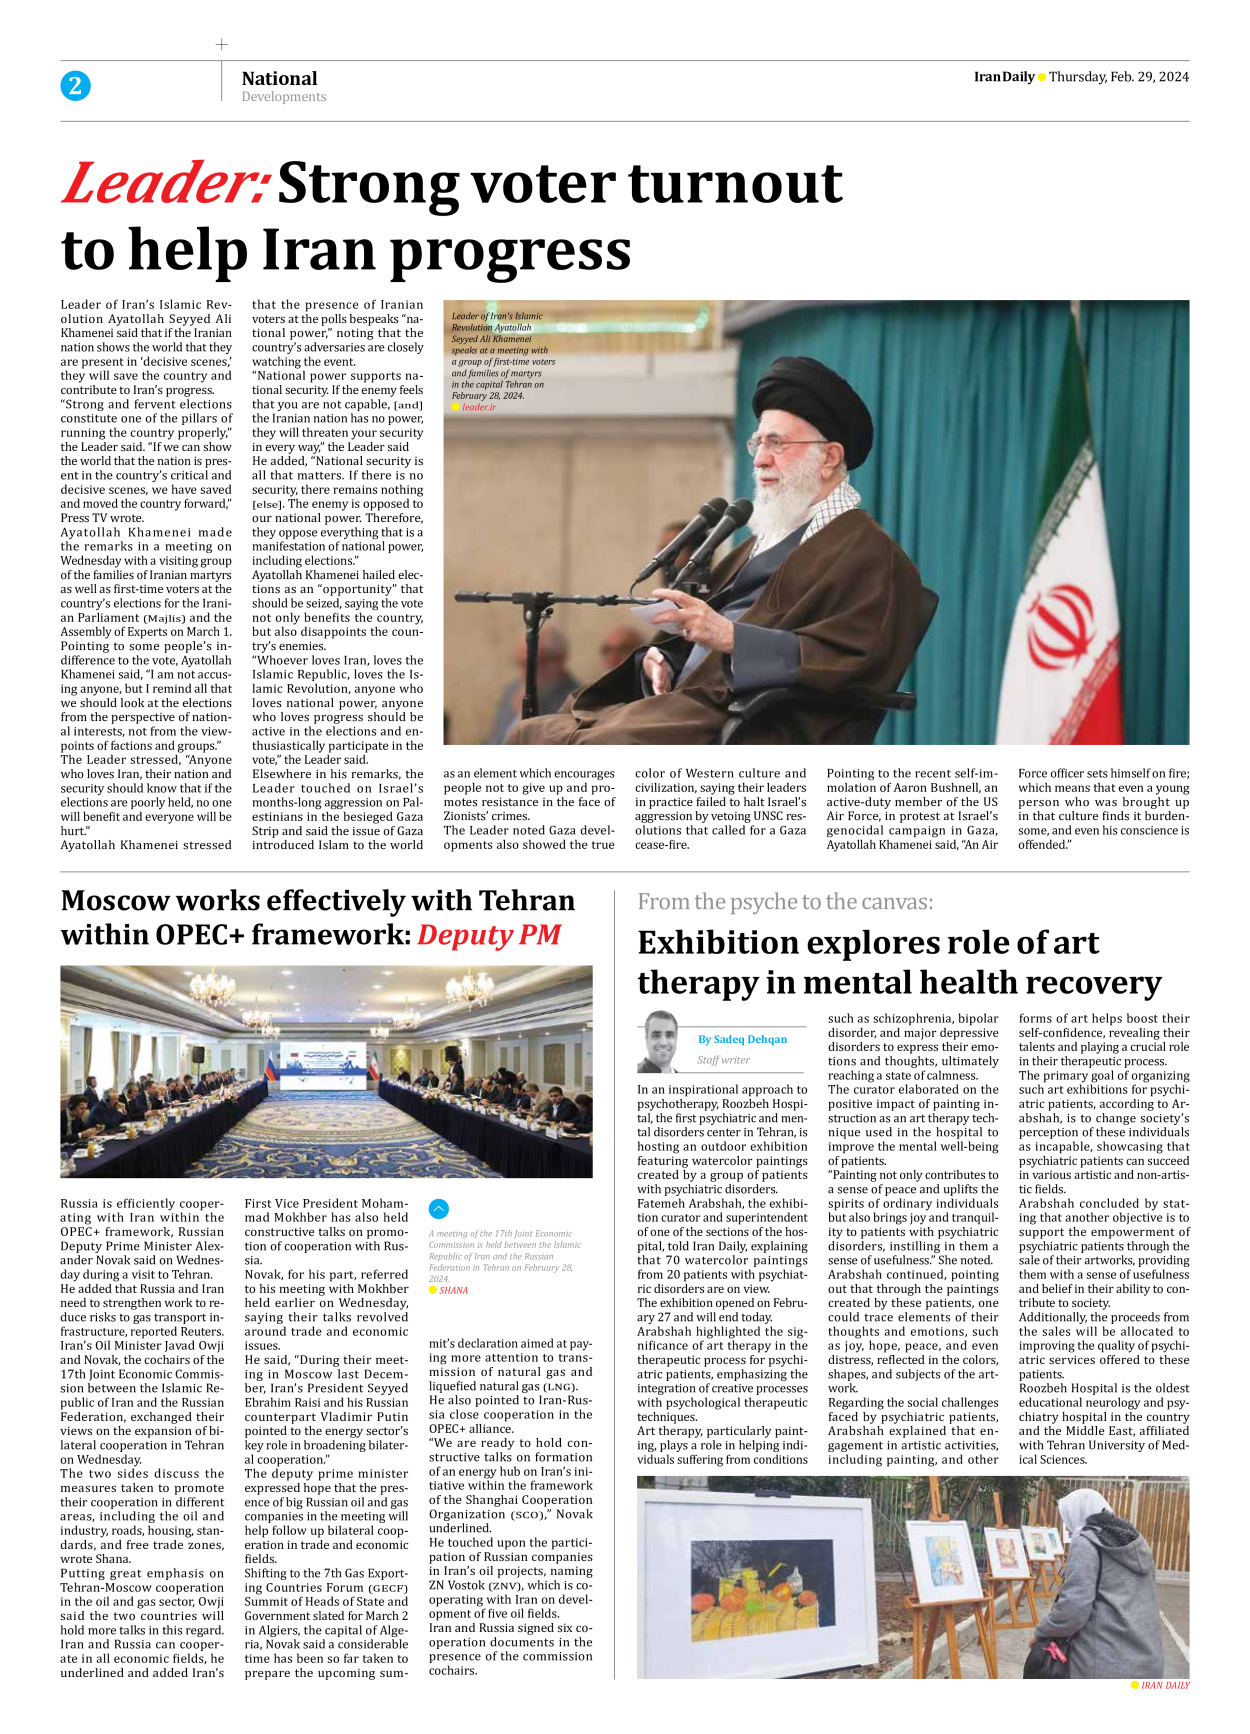 Iran Daily - Number Seven Thousand Five Hundred and Eighteen - 29 February 2024 - Page 2